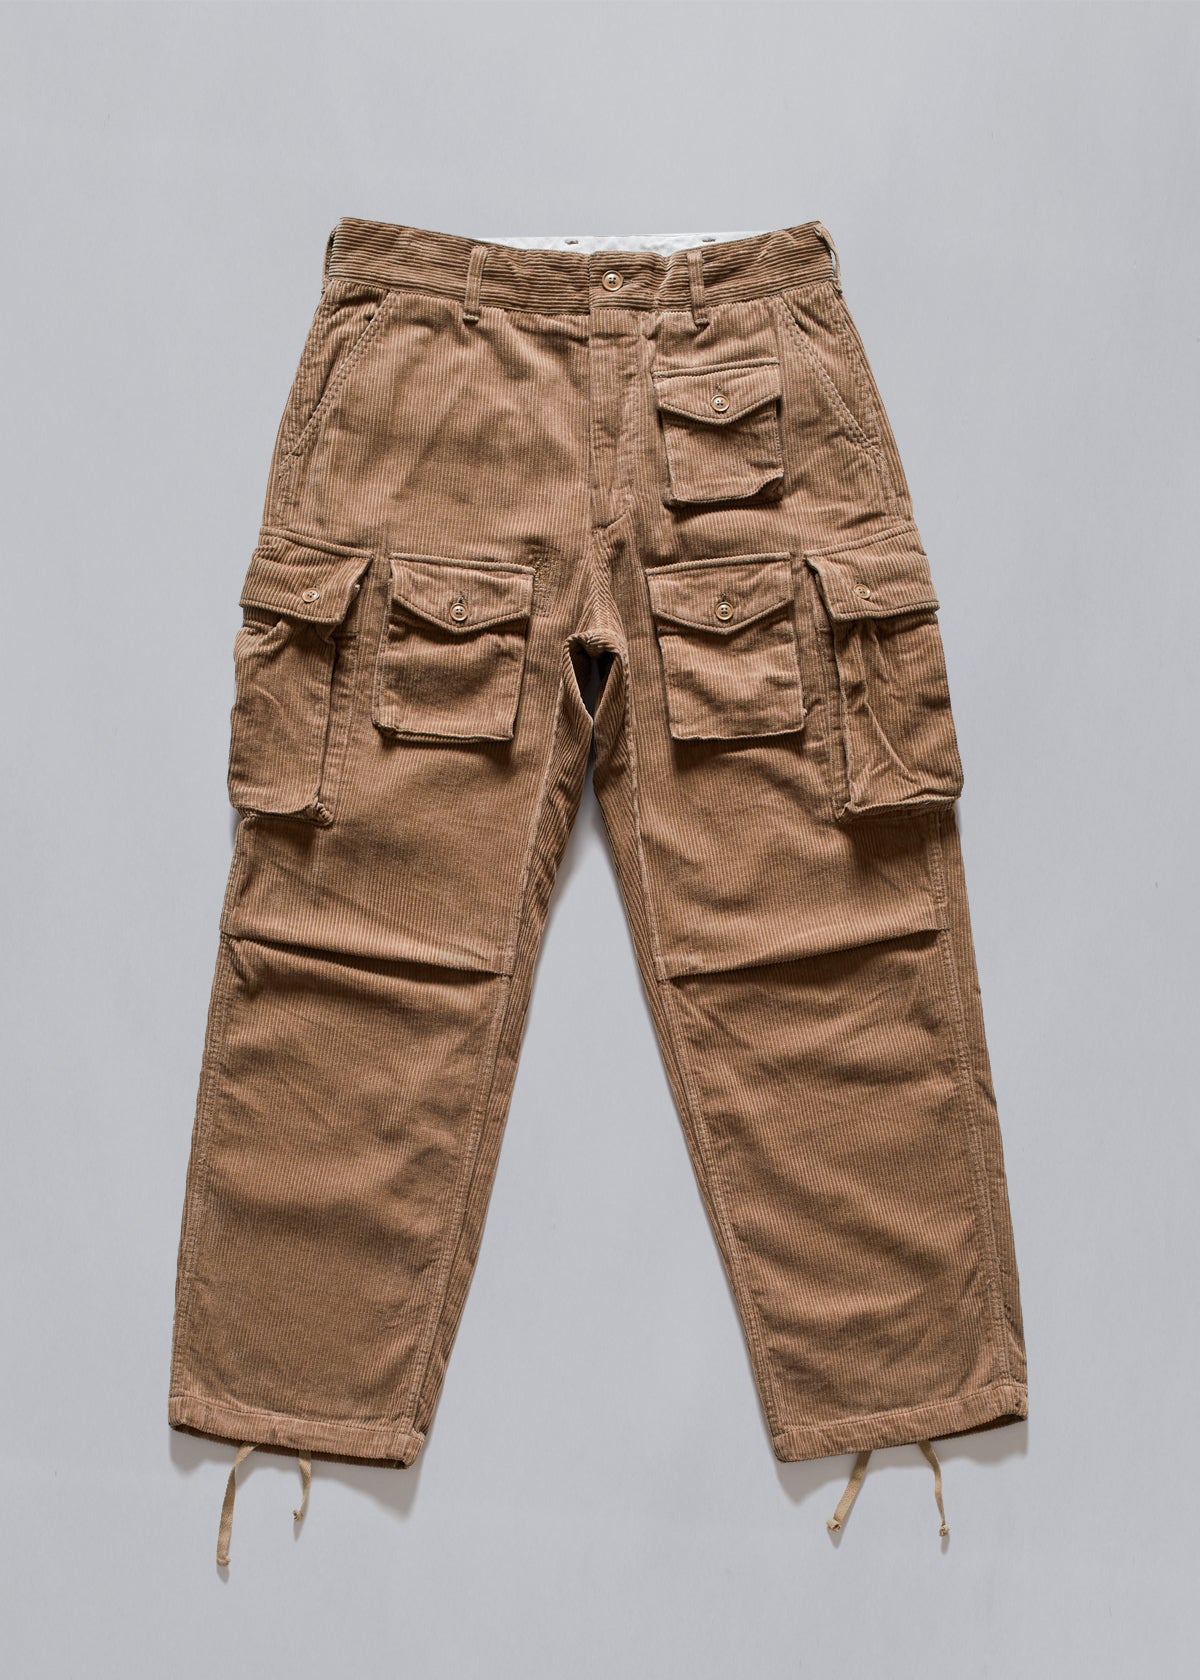 Corduroy FA Pants AW2021 - Small - The Archivist Store